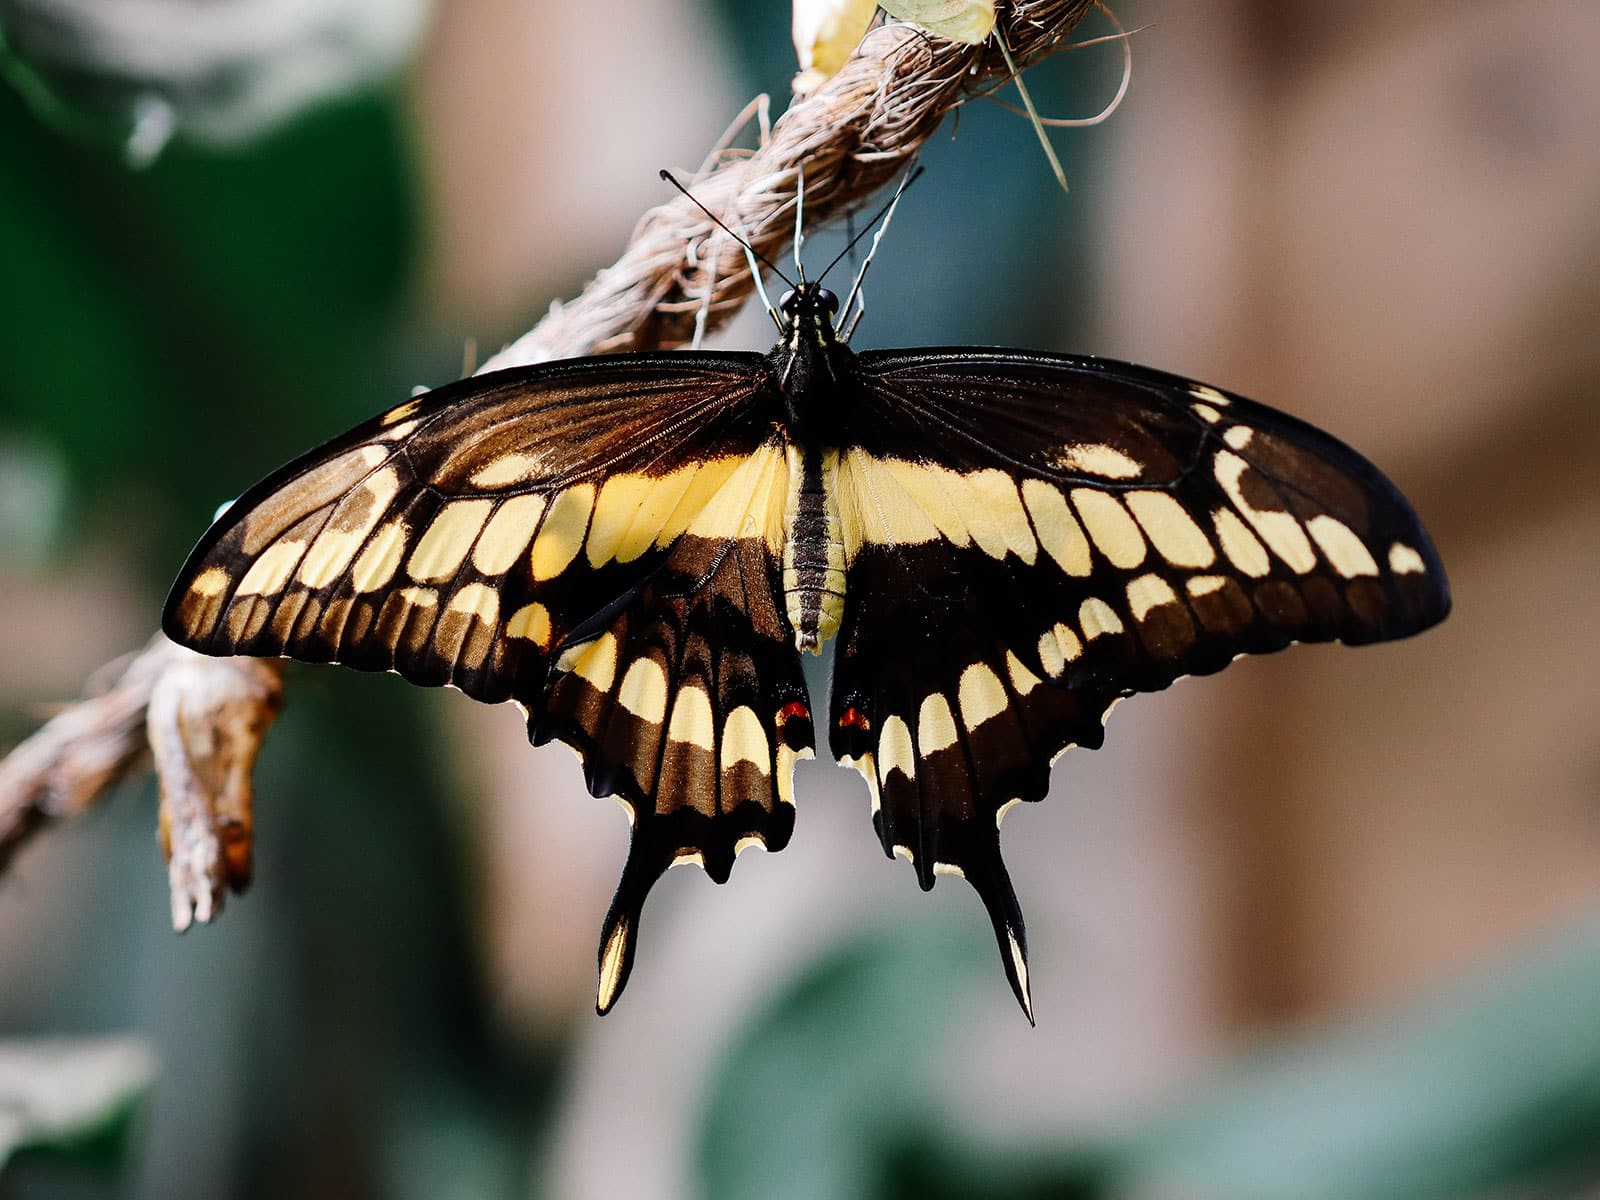 Giant swallowtail butterfly standing on a piece of rustic twine